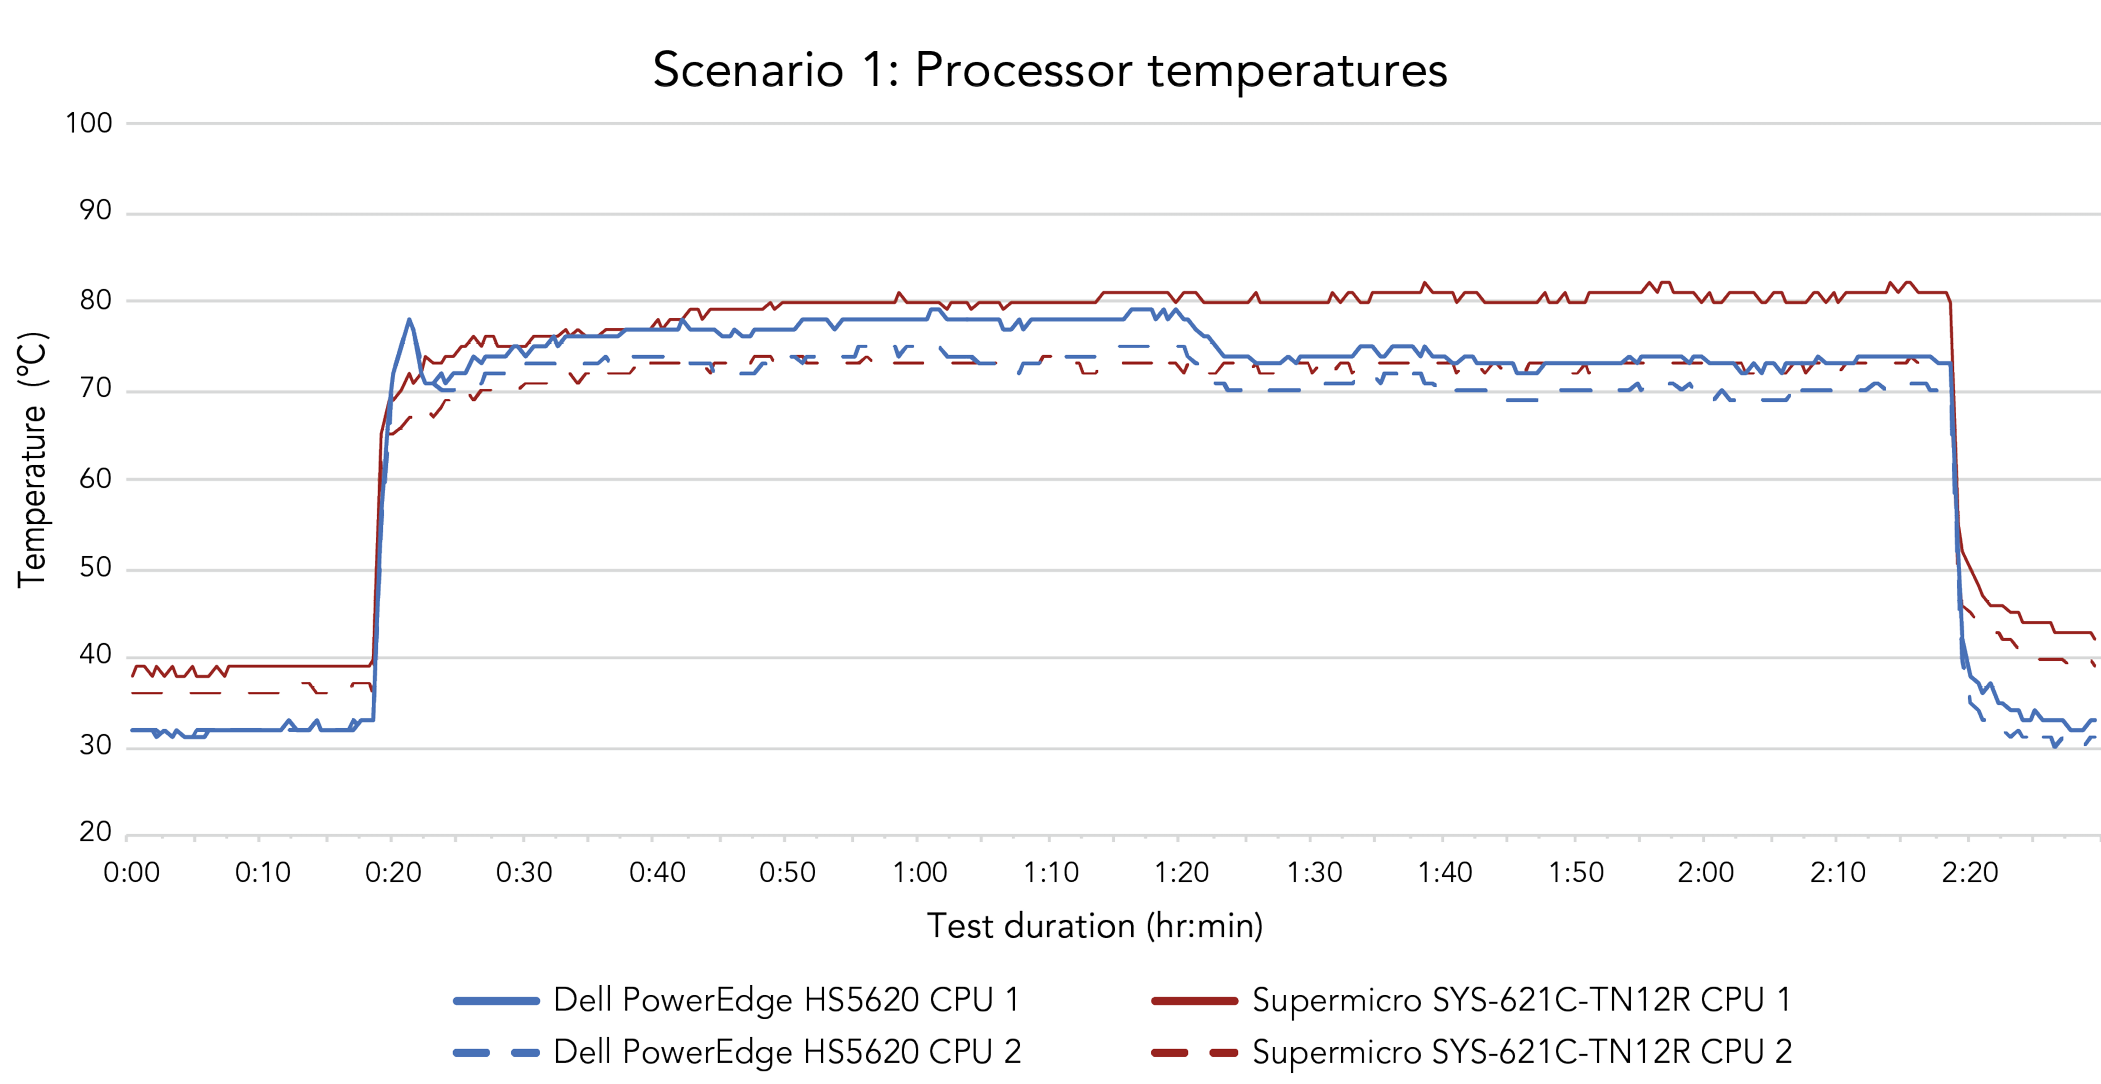 A line graph comparing each system’s processor temperatures over the course of the two-and-a-half-hour scenario 1 test, which includes an idle period 15 minutes before the workload began, the two-hour workload, and 15 minutes after the workload completed. The Dell PowerEdge HS5620 server’s two processors remained below 35°C before the workload, rose to just under 80°C at the start of the workload, and dropped down to stay between 68°C and 80°C over the course of the two-hour workload. They dropped below 35°C after the test ended. The Supermicro SYS‑621C-TN12R server’s processors started just under 40°C, then rose to just over 70°C toward the start of the workload. One of the processors stayed under 75°C throughout the two-and-a-half-hour period, while the other rose to just over 80°C and remained in that range for about an hour. When the workload ended, the processors’ temperatures dropped to around 40°C.